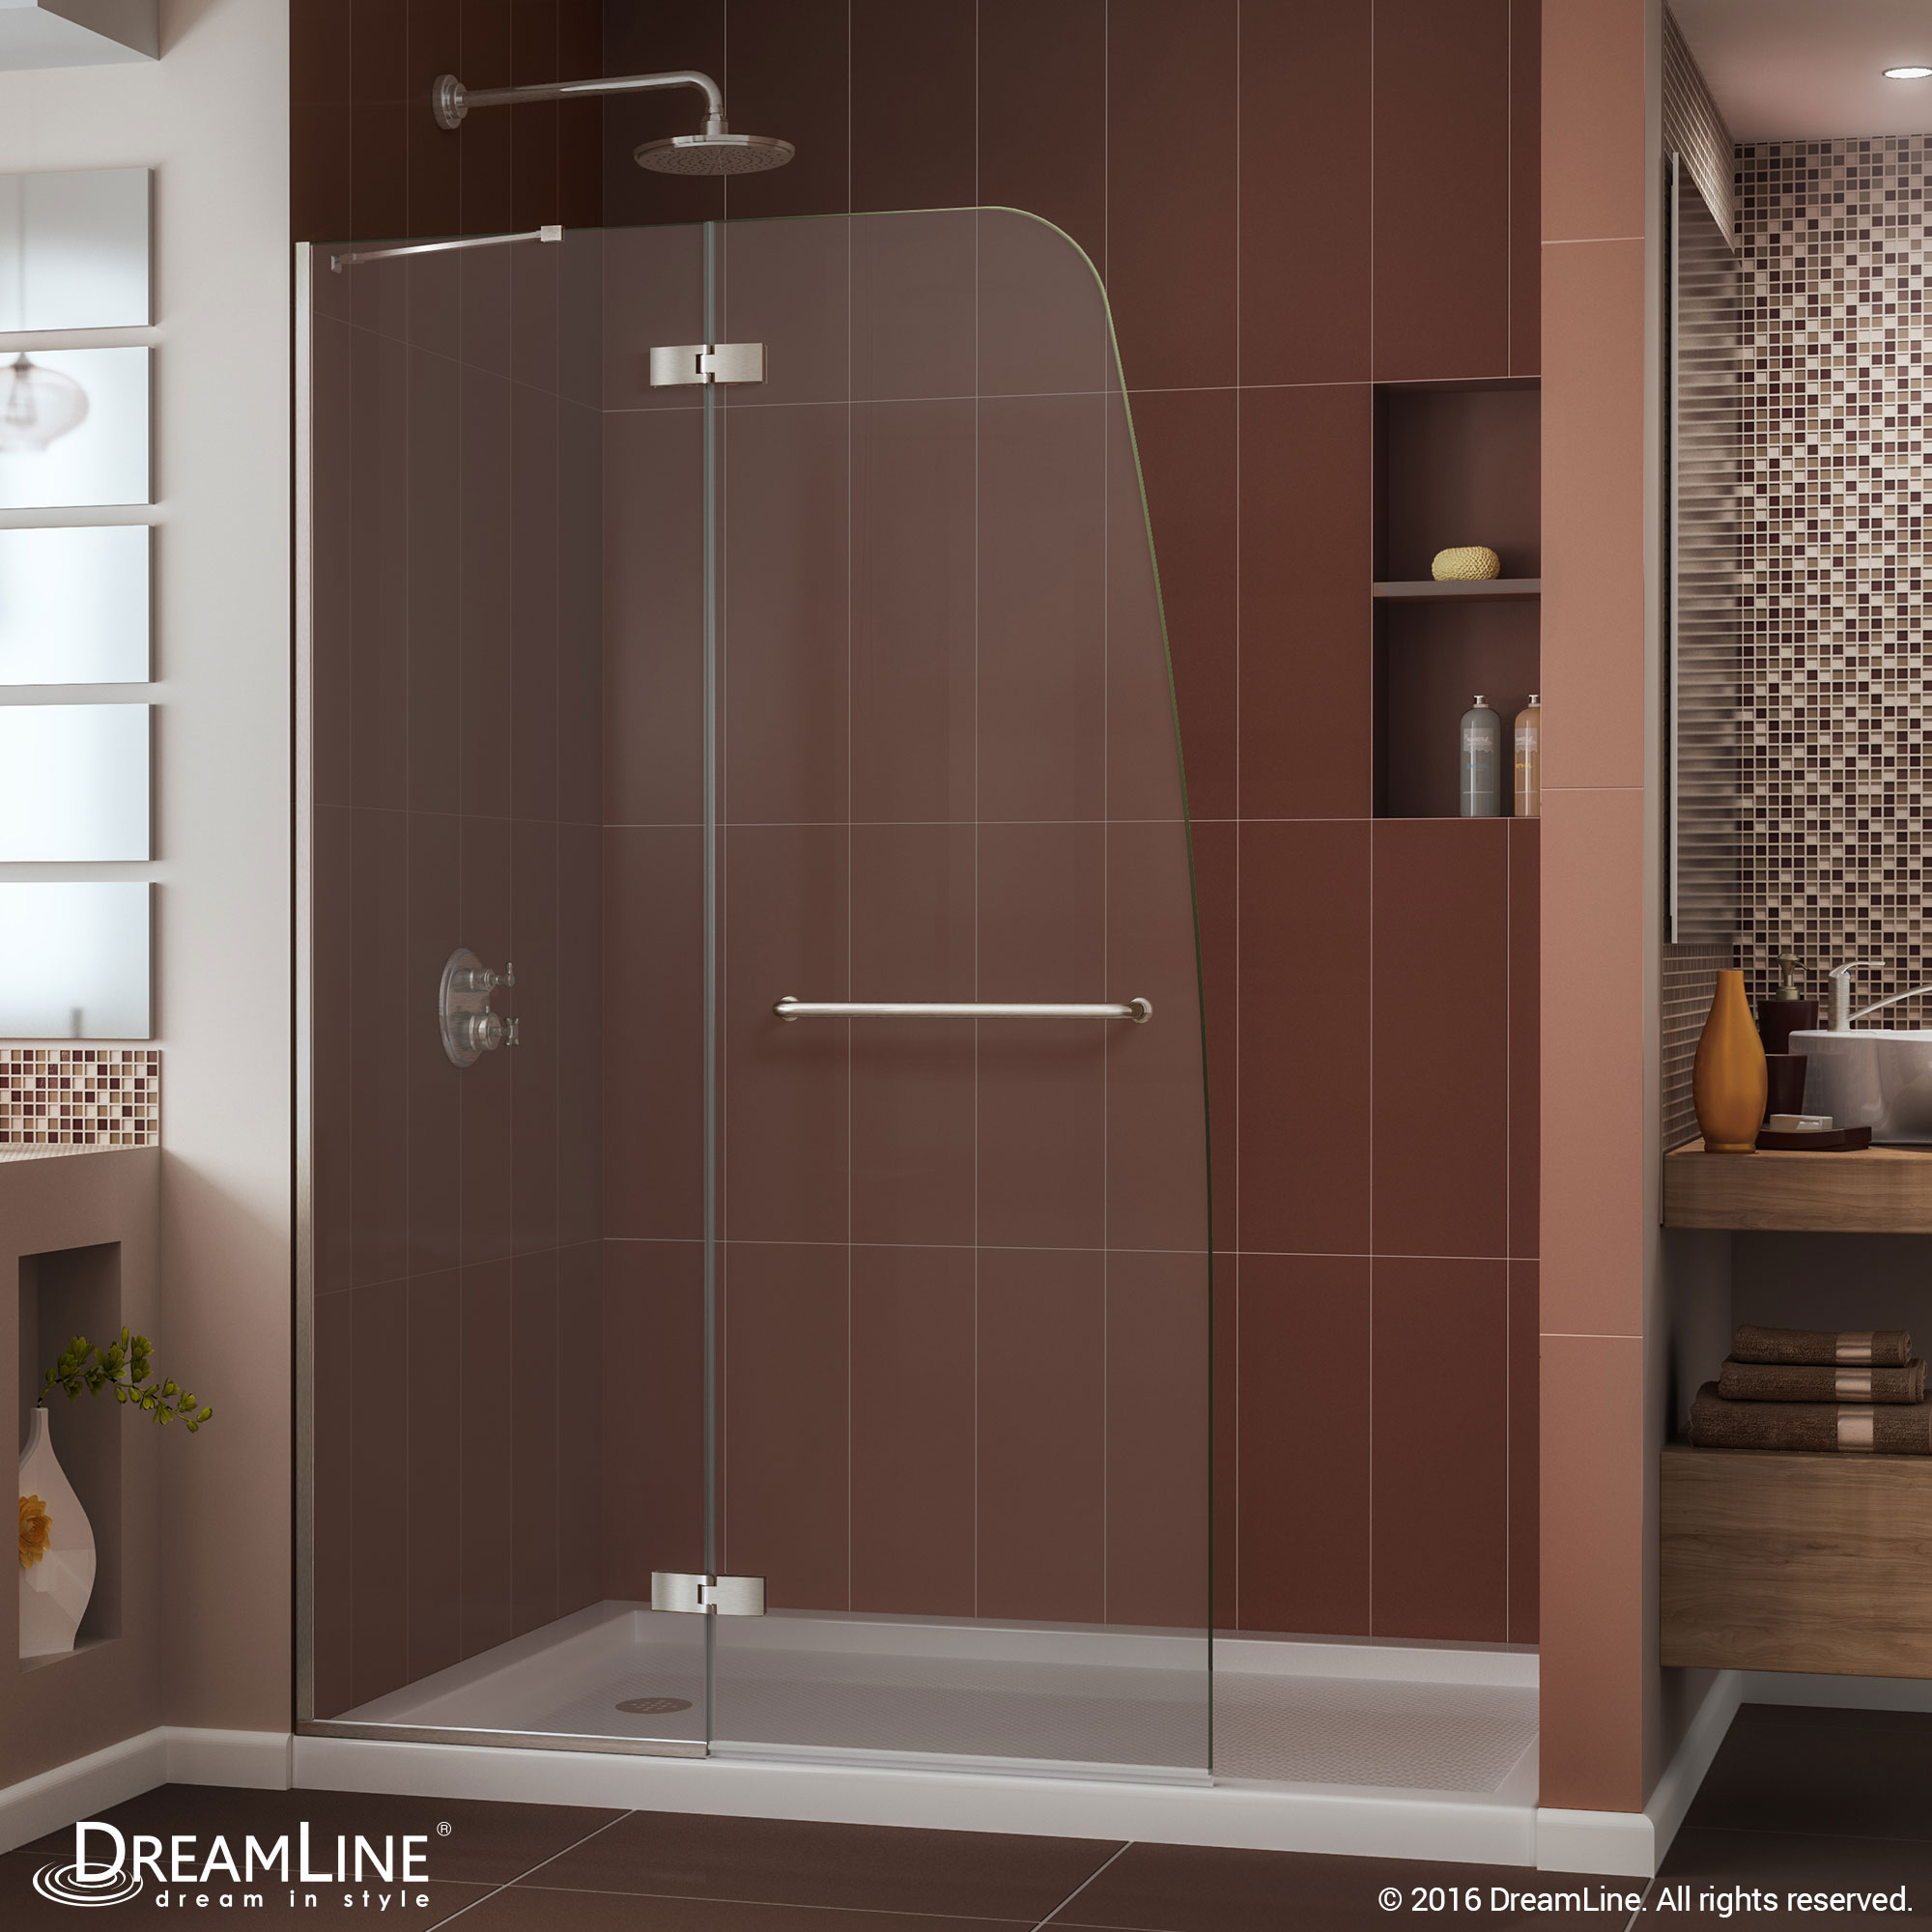 DreamLine Aqua Ultra 34 in. D x 60 in. W x 74 3/4 in. H Frameless Shower Door in Chrome and Left Drain Biscuit Base Kit